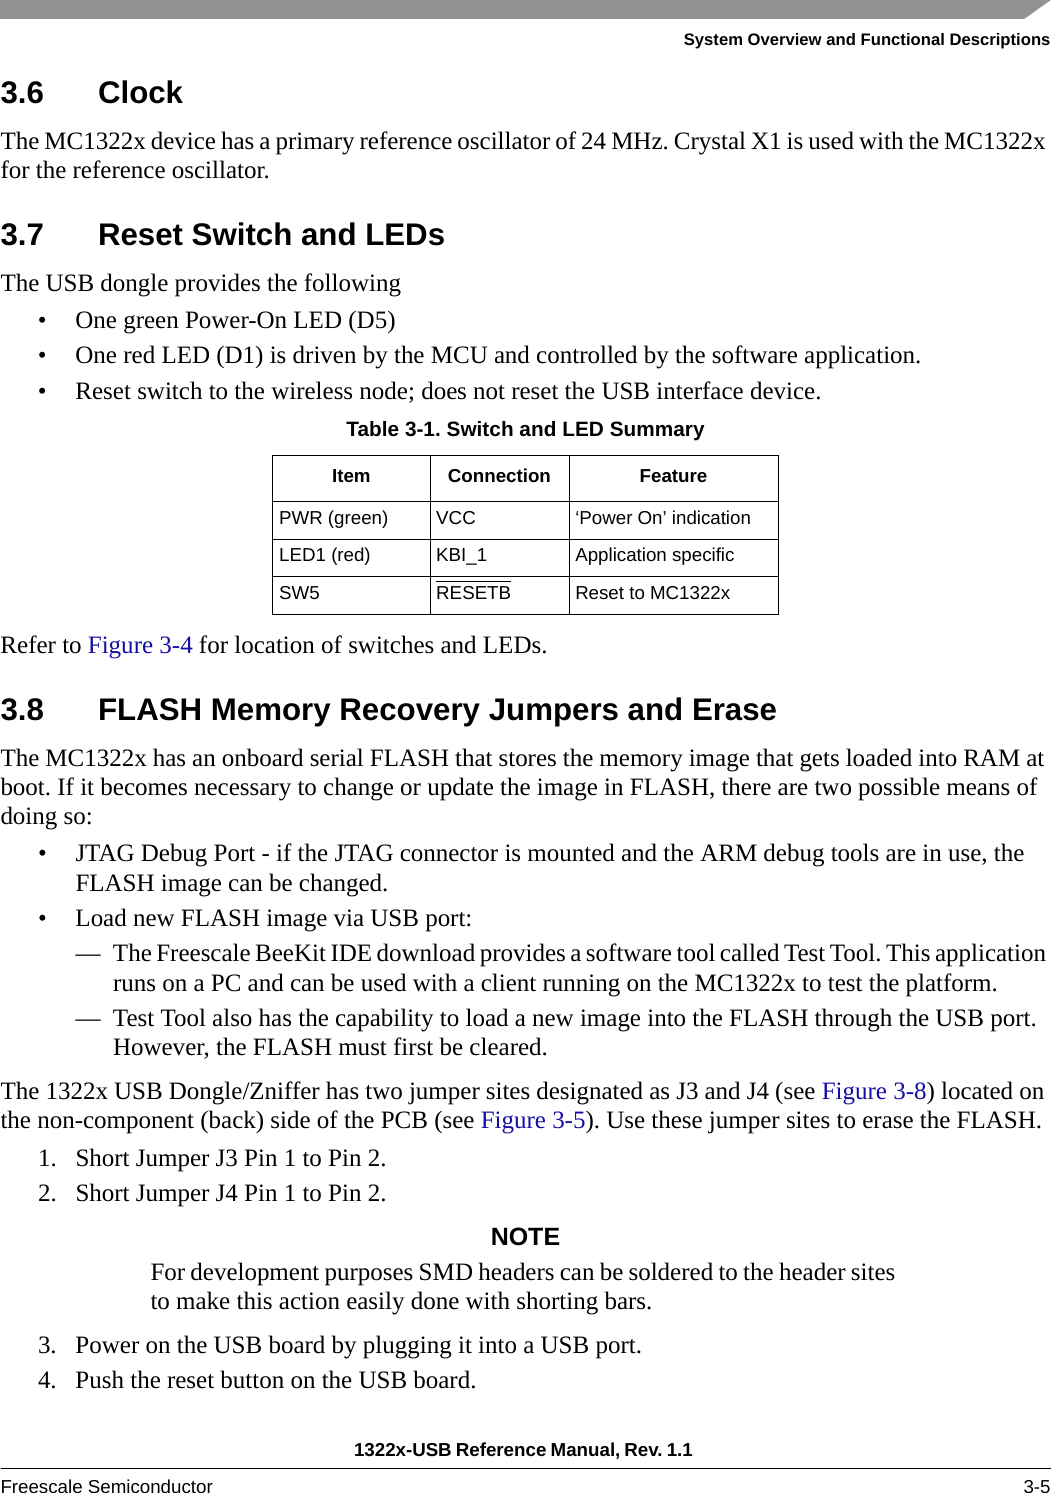 System Overview and Functional Descriptions1322x-USB Reference Manual, Rev. 1.1 Freescale Semiconductor 3-53.6 ClockThe MC1322x device has a primary reference oscillator of 24 MHz. Crystal X1 is used with the MC1322x for the reference oscillator.3.7 Reset Switch and LEDsThe USB dongle provides the following• One green Power-On LED (D5)• One red LED (D1) is driven by the MCU and controlled by the software application.• Reset switch to the wireless node; does not reset the USB interface device.Refer to Figure 3-4 for location of switches and LEDs.3.8 FLASH Memory Recovery Jumpers and EraseThe MC1322x has an onboard serial FLASH that stores the memory image that gets loaded into RAM at boot. If it becomes necessary to change or update the image in FLASH, there are two possible means of doing so:• JTAG Debug Port - if the JTAG connector is mounted and the ARM debug tools are in use, the FLASH image can be changed.• Load new FLASH image via USB port:— The Freescale BeeKit IDE download provides a software tool called Test Tool. This application runs on a PC and can be used with a client running on the MC1322x to test the platform.— Test Tool also has the capability to load a new image into the FLASH through the USB port. However, the FLASH must first be cleared.The 1322x USB Dongle/Zniffer has two jumper sites designated as J3 and J4 (see Figure 3-8) located on the non-component (back) side of the PCB (see Figure 3-5). Use these jumper sites to erase the FLASH.1. Short Jumper J3 Pin 1 to Pin 2. 2. Short Jumper J4 Pin 1 to Pin 2.NOTEFor development purposes SMD headers can be soldered to the header sites to make this action easily done with shorting bars.3. Power on the USB board by plugging it into a USB port.4. Push the reset button on the USB board.Table 3-1. Switch and LED SummaryItem Connection FeaturePWR (green) VCC ‘Power On’ indicationLED1 (red) KBI_1 Application specificSW5 RESETB Reset to MC1322x